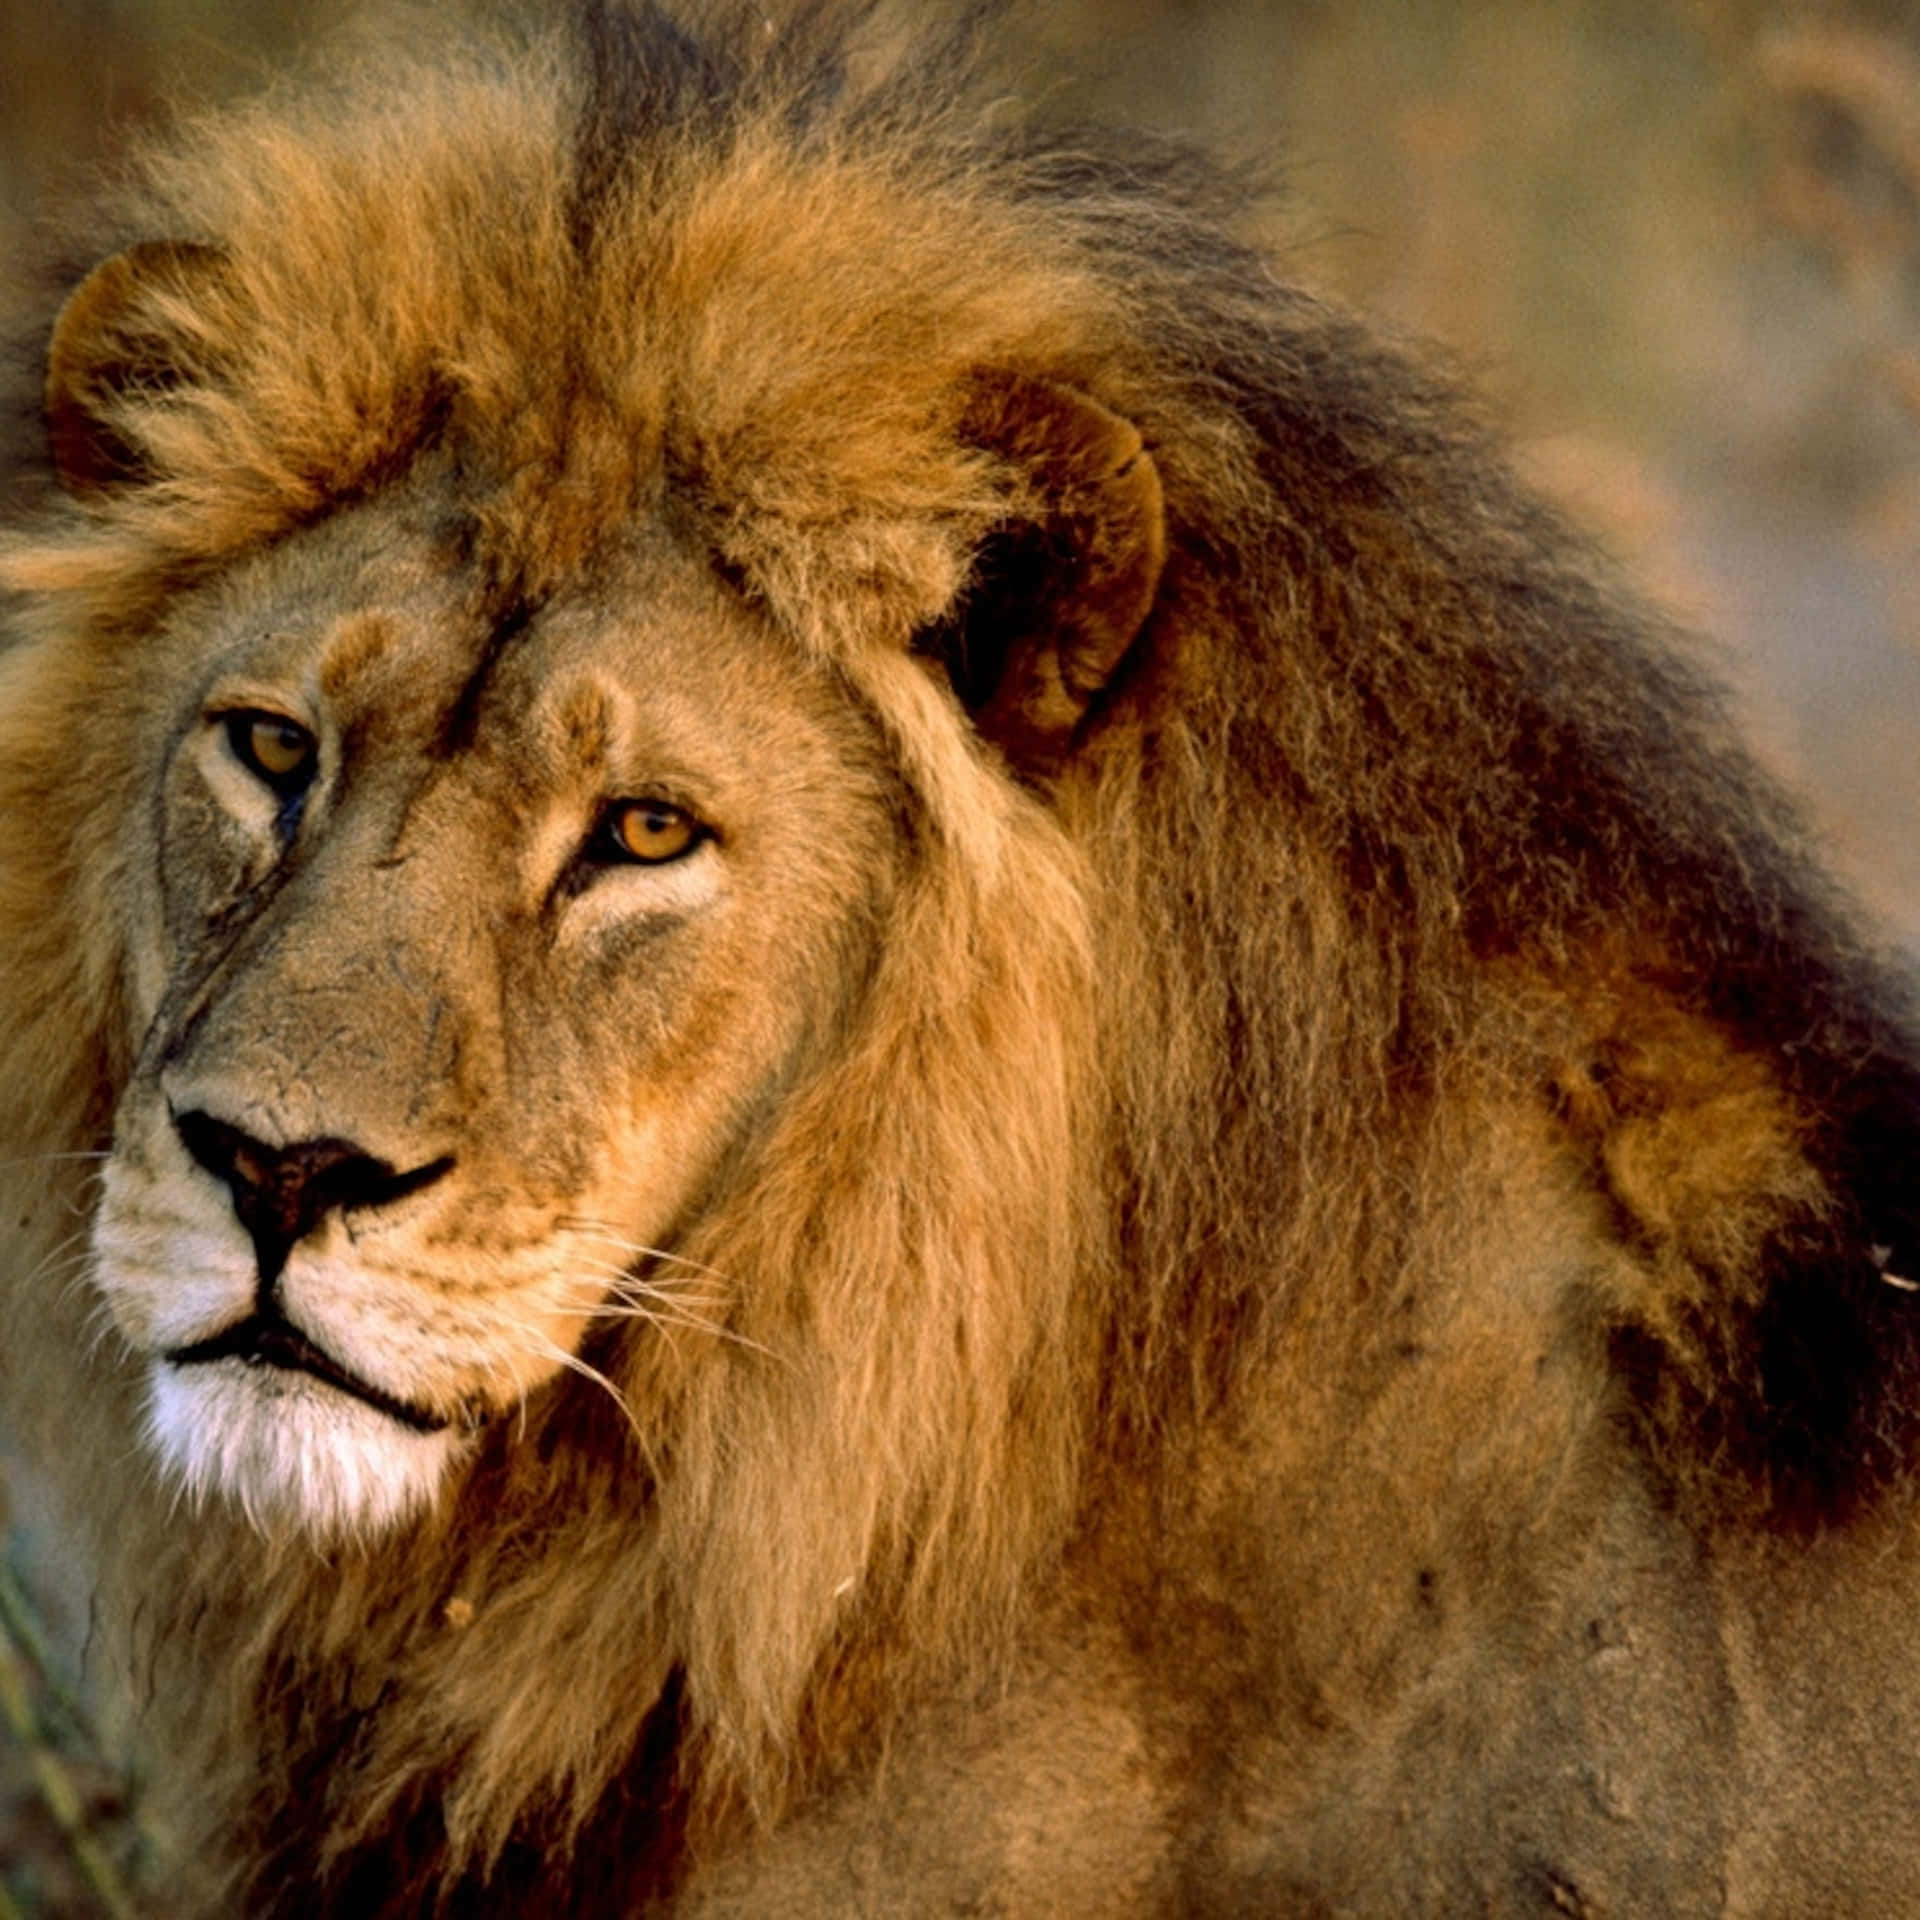 Majestic King of the Jungle - Asiatic Lion Wallpaper